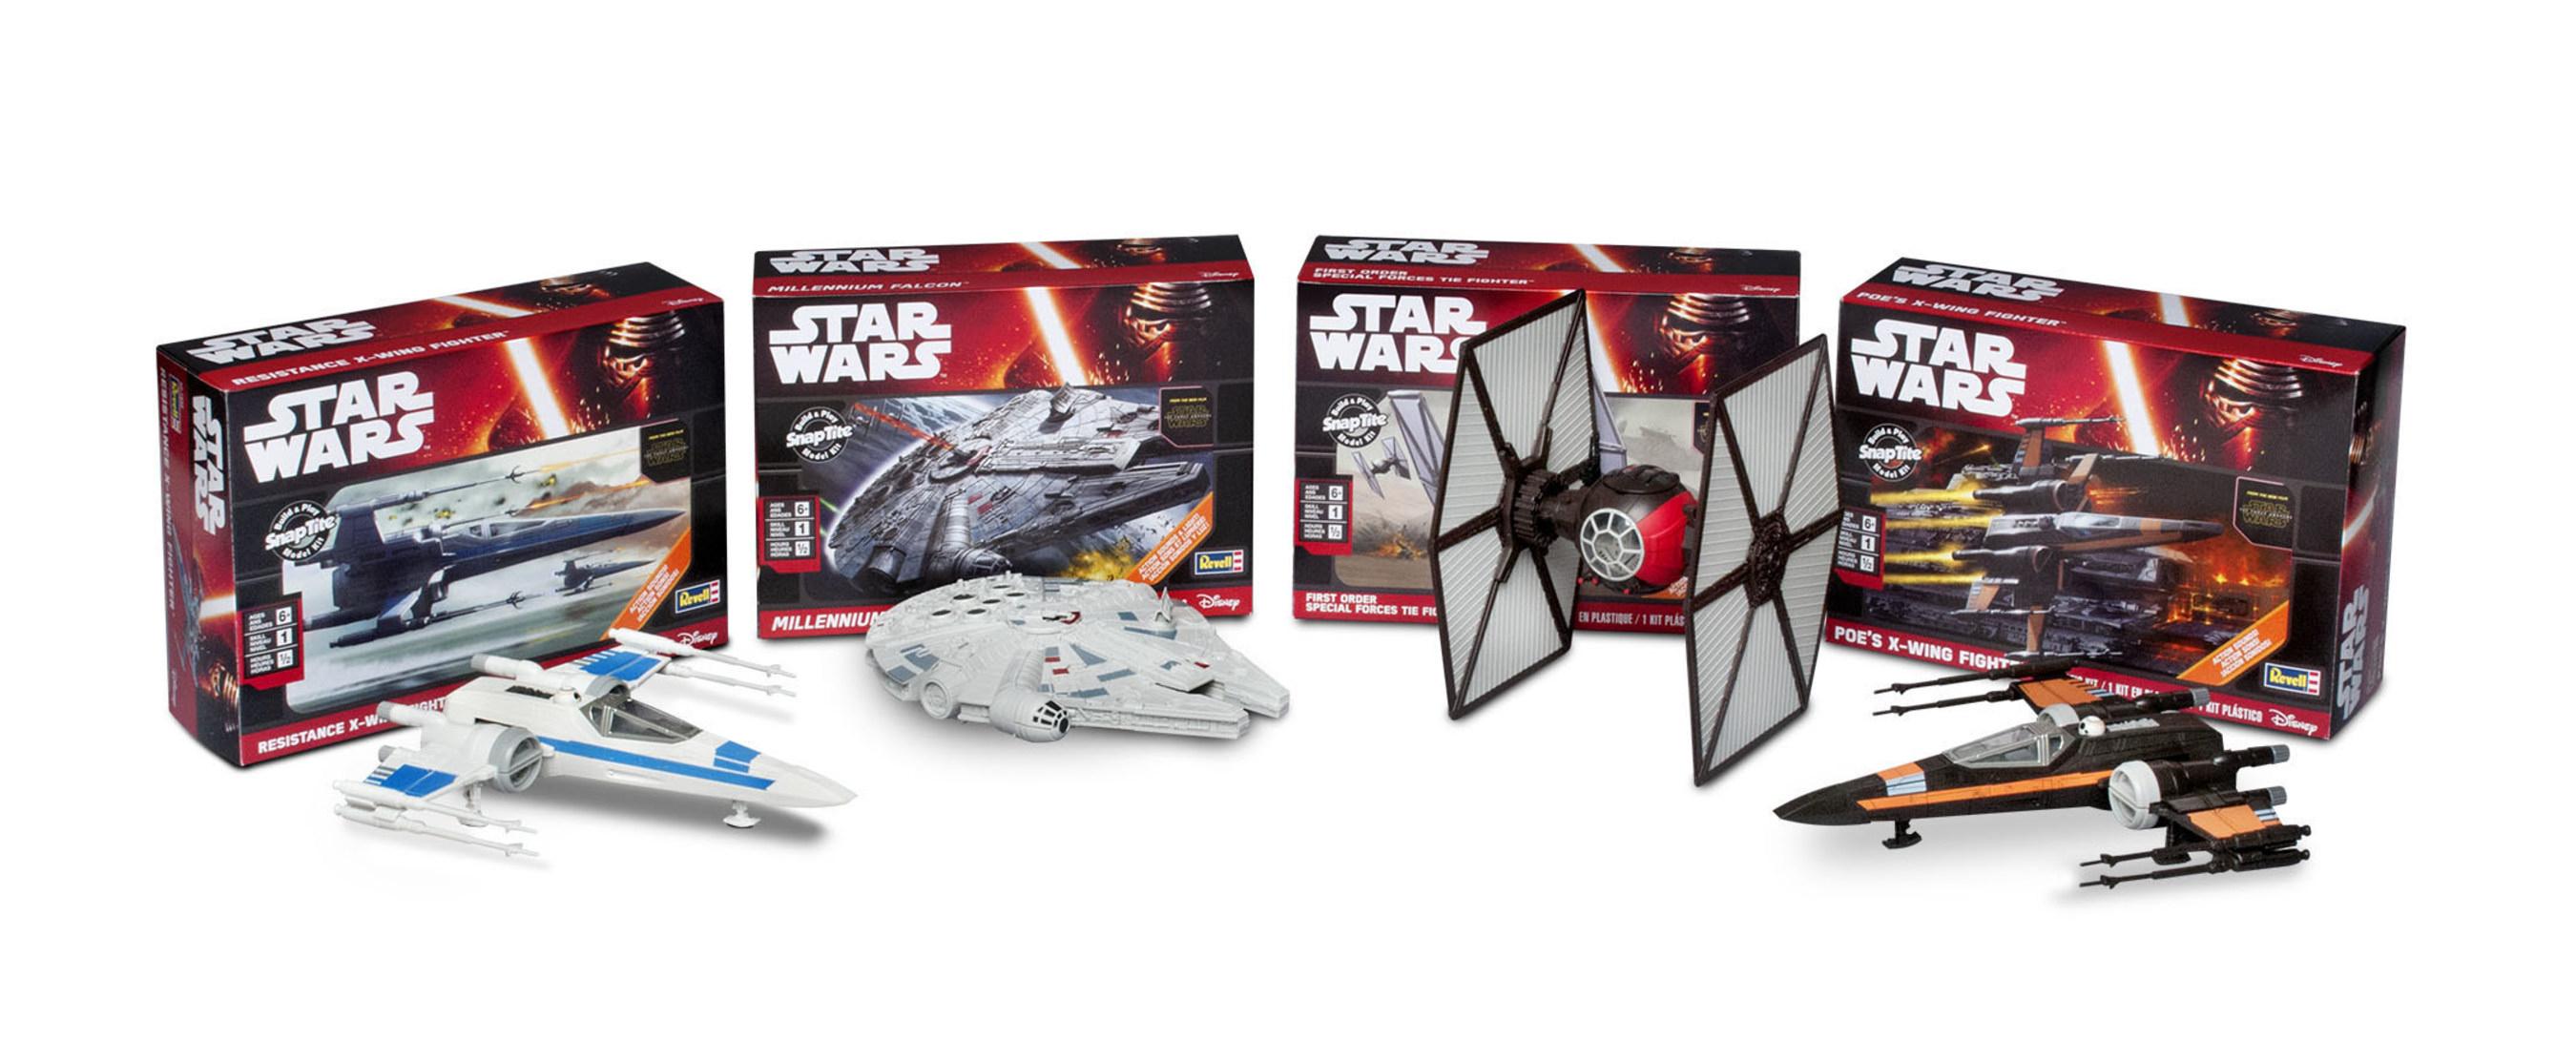 Star Wars Millennium Falcon First Order Tie Fighter Model Kit Revell Snap Tite 